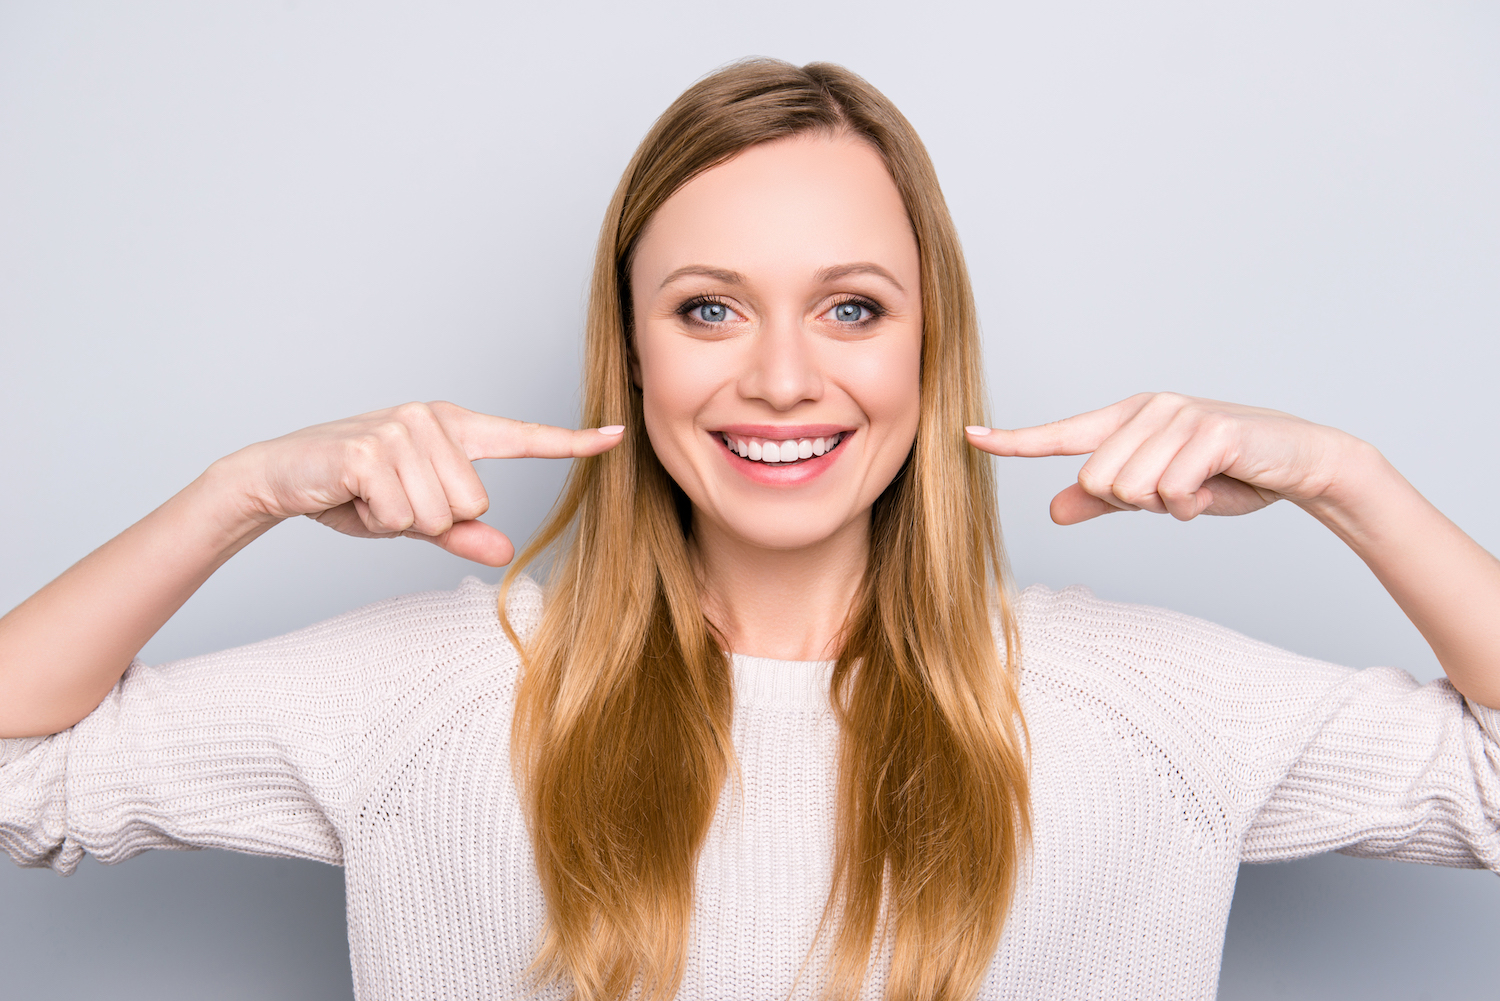 Blonde woman smiles while pointing to her white teeth